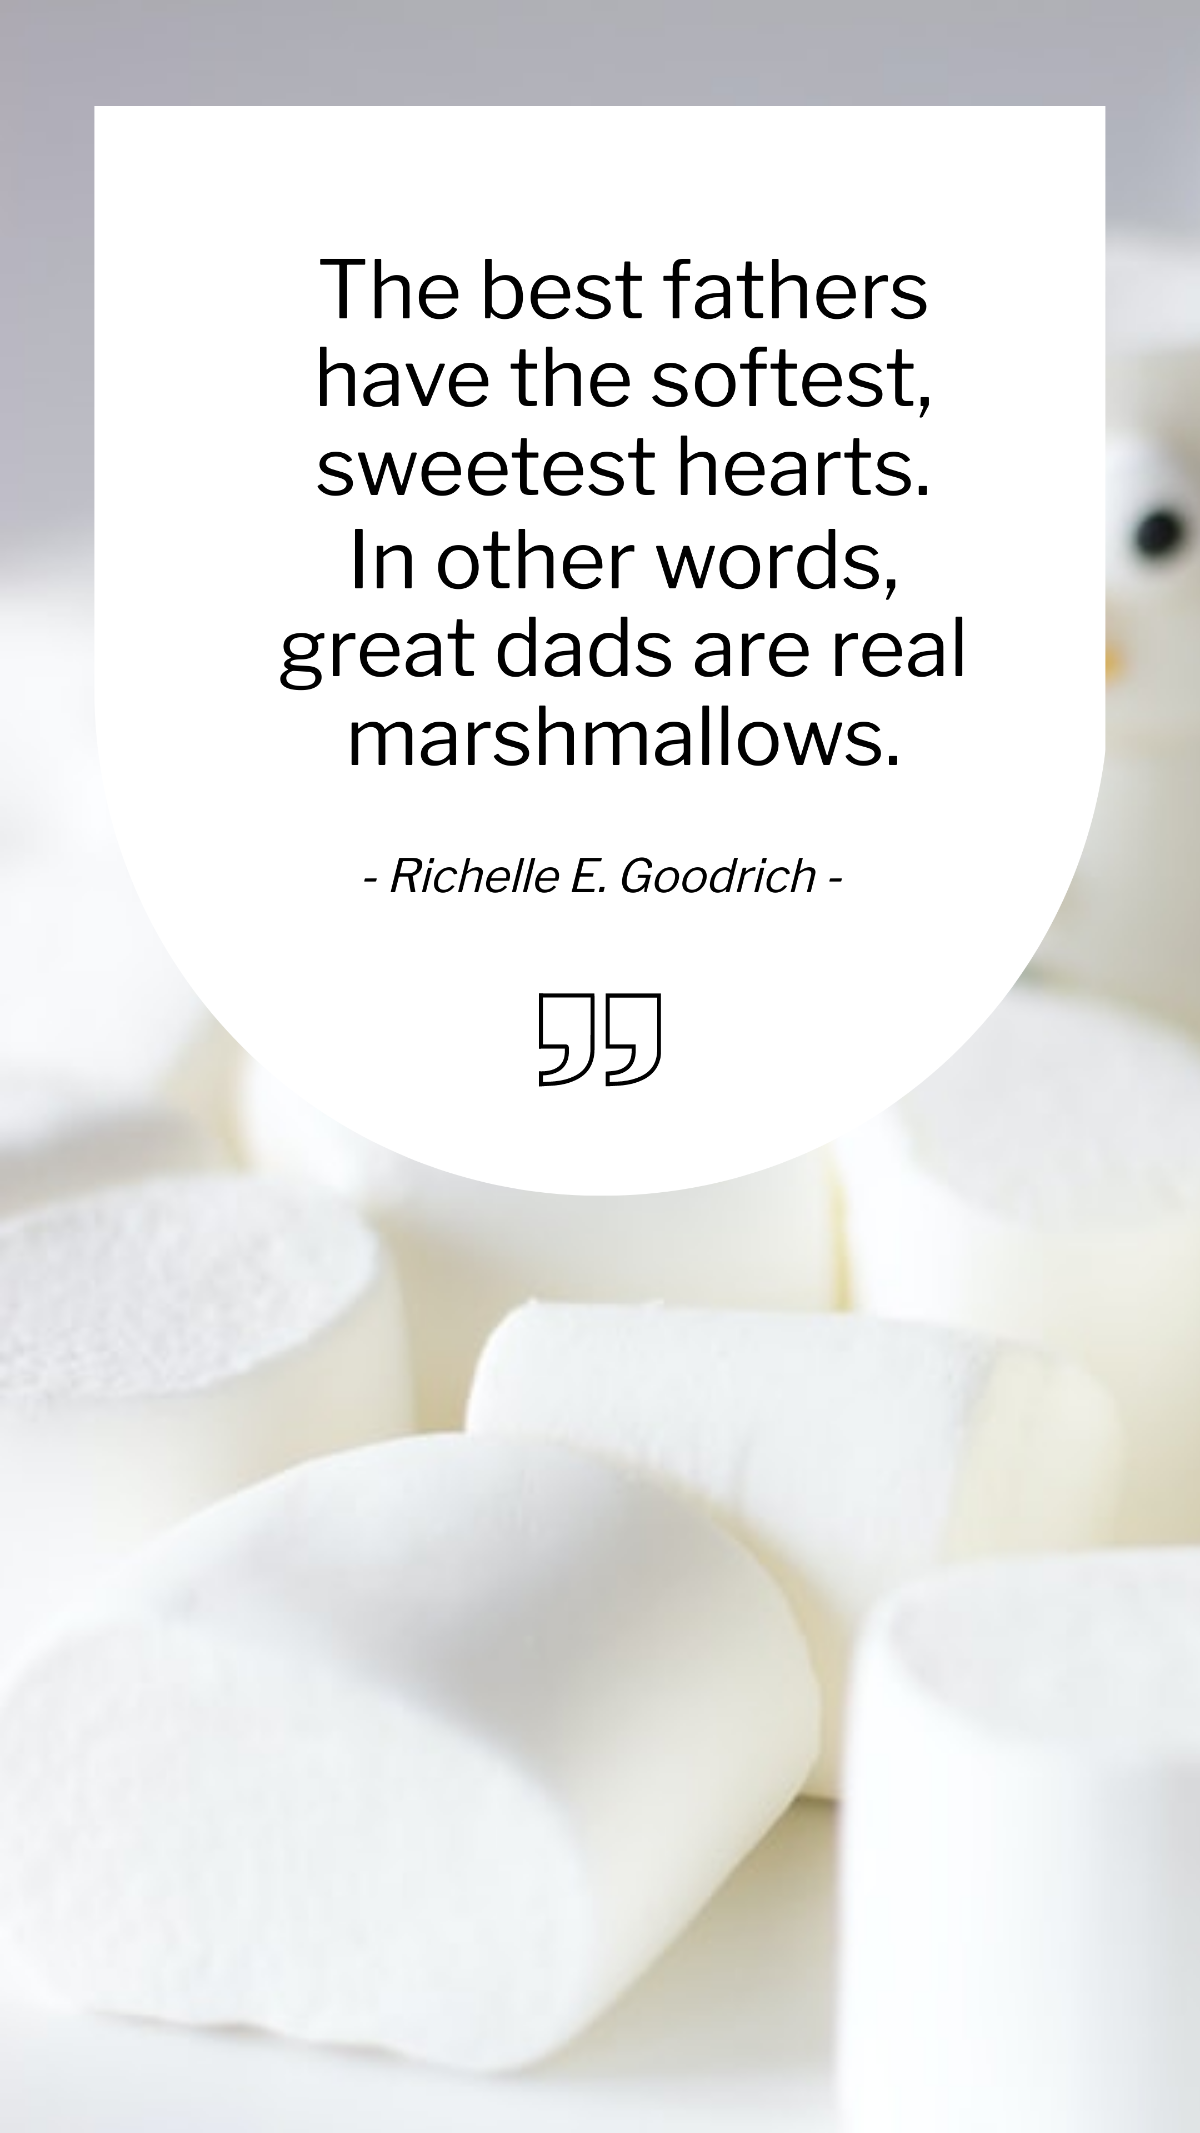 Richelle E. Goodrich - The best fathers have the softest, sweetest hearts. In other words, great dads are real marshmallows. Template